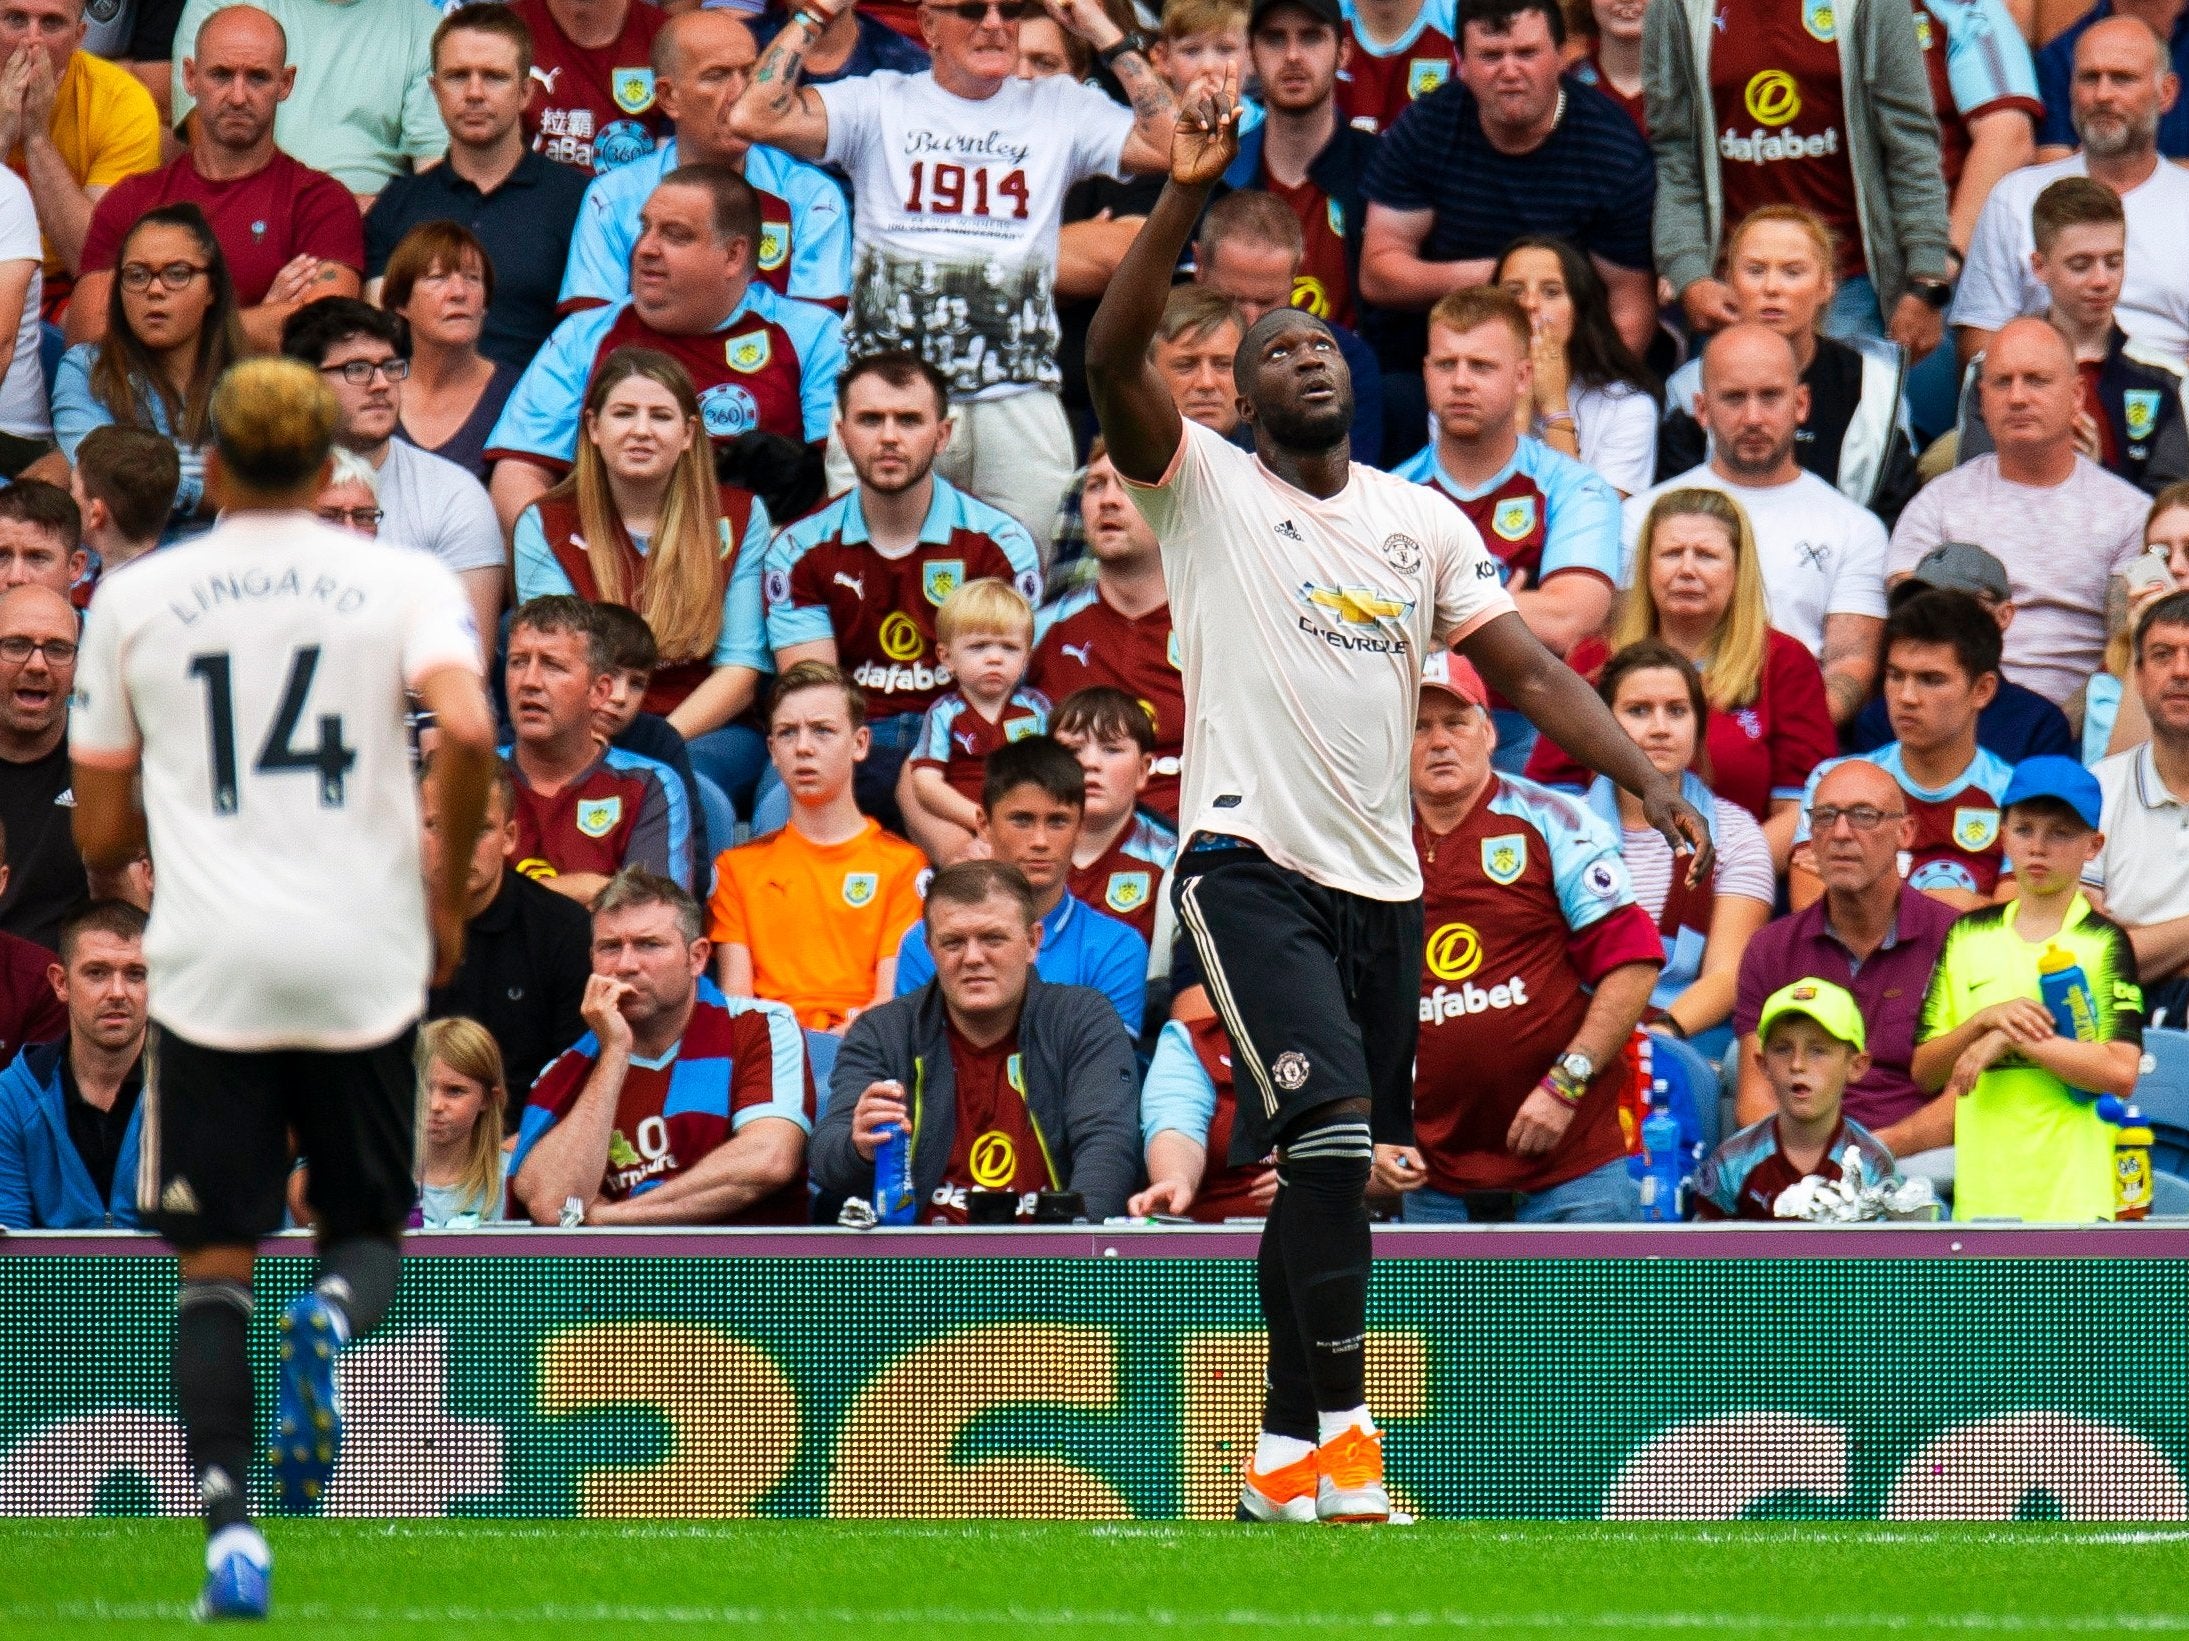 Burnley vs Manchester United LIVE - Latest score and updates as Romelu Lukaku heads United into the lead